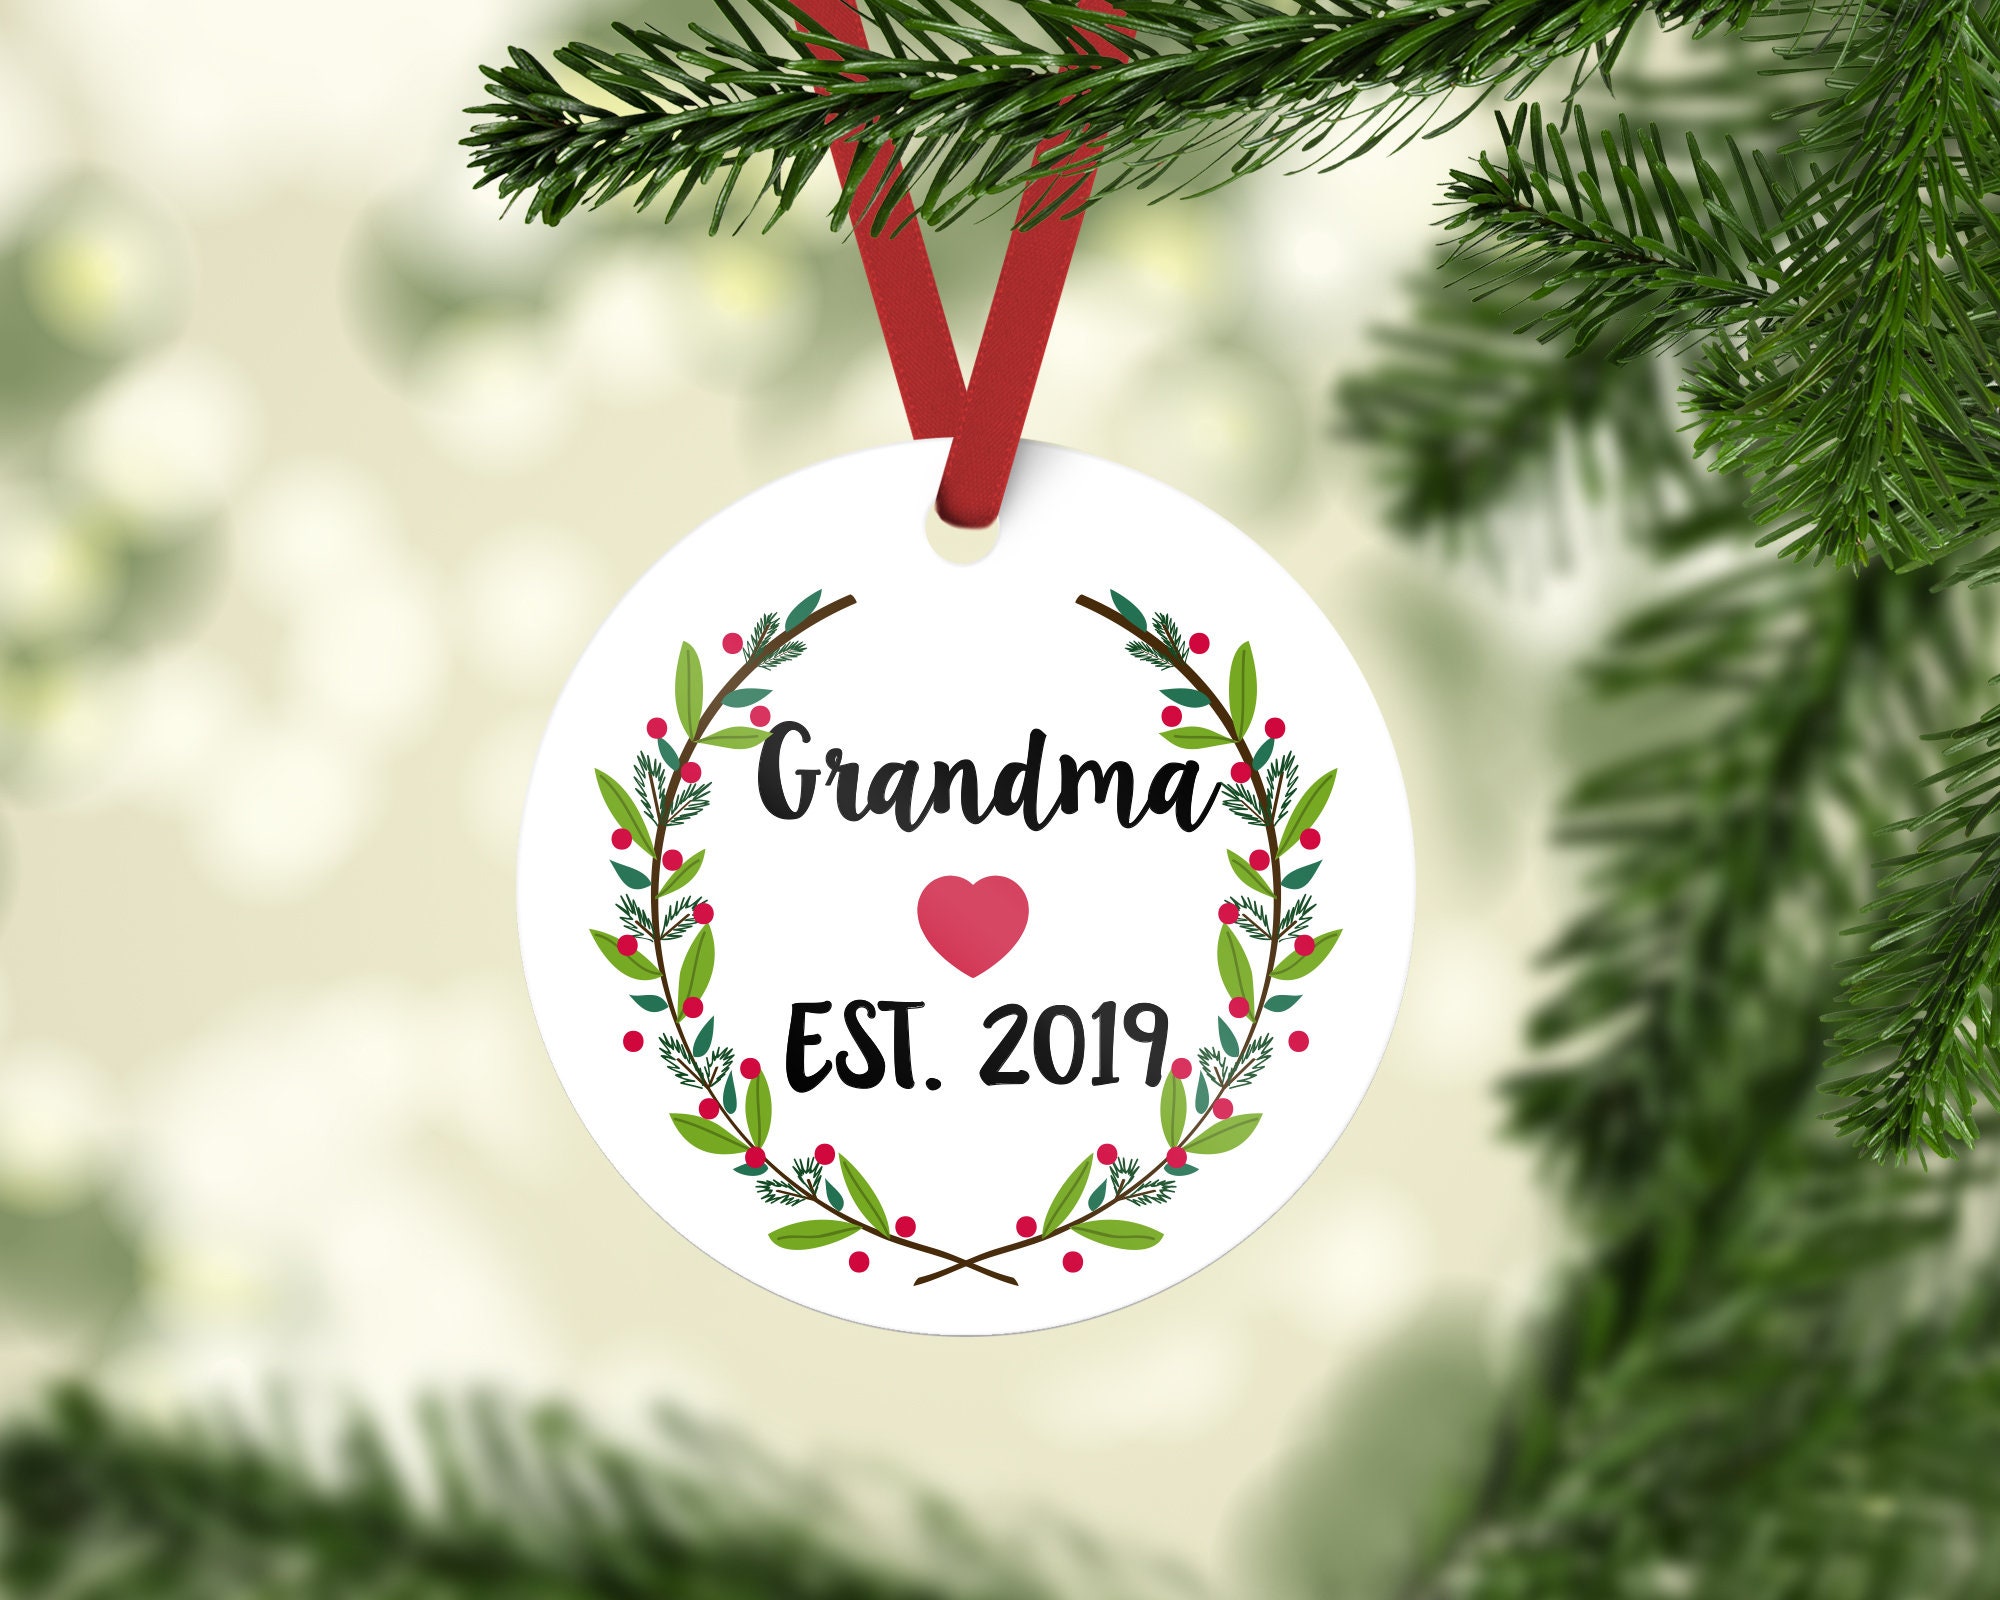 Customize Your Own! 1st Time Grandma 2018 Ornaments You Can Personalize